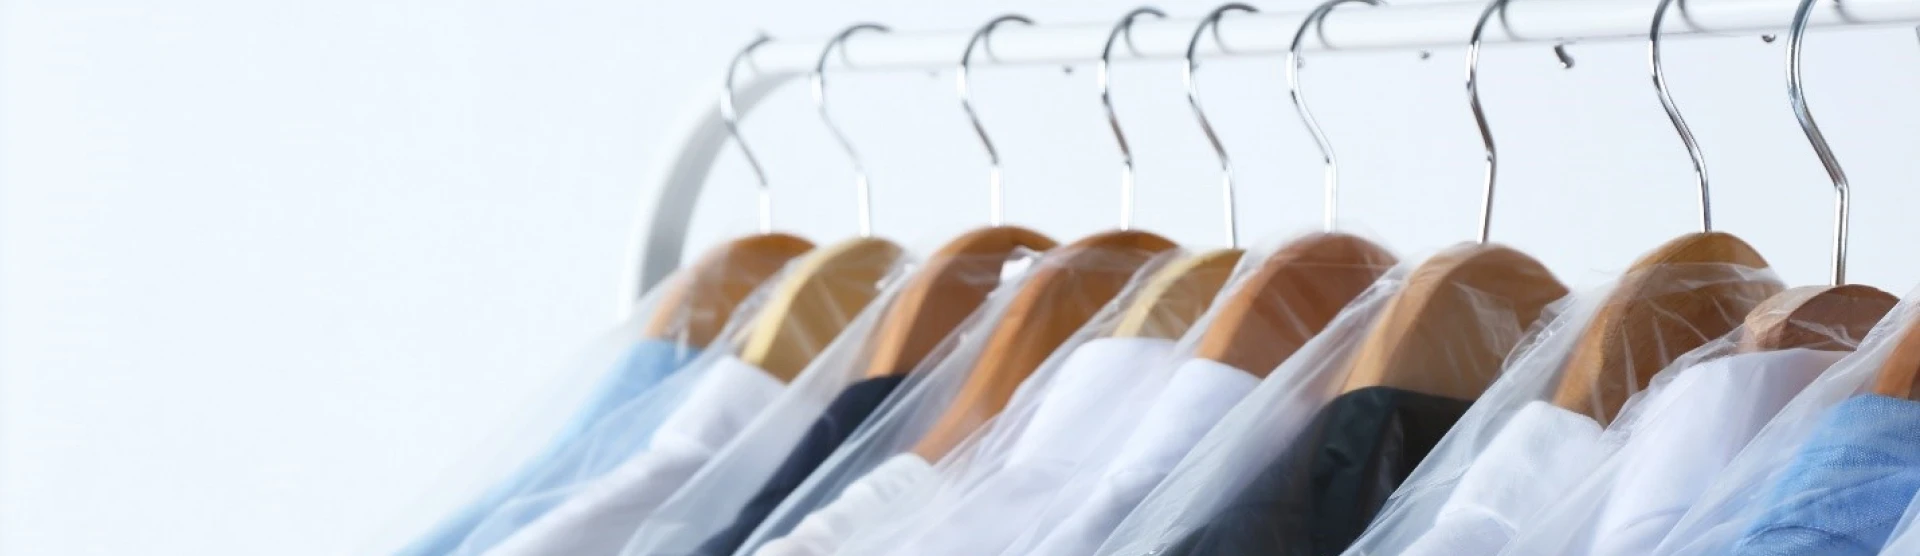 Dry-cleaned shirts